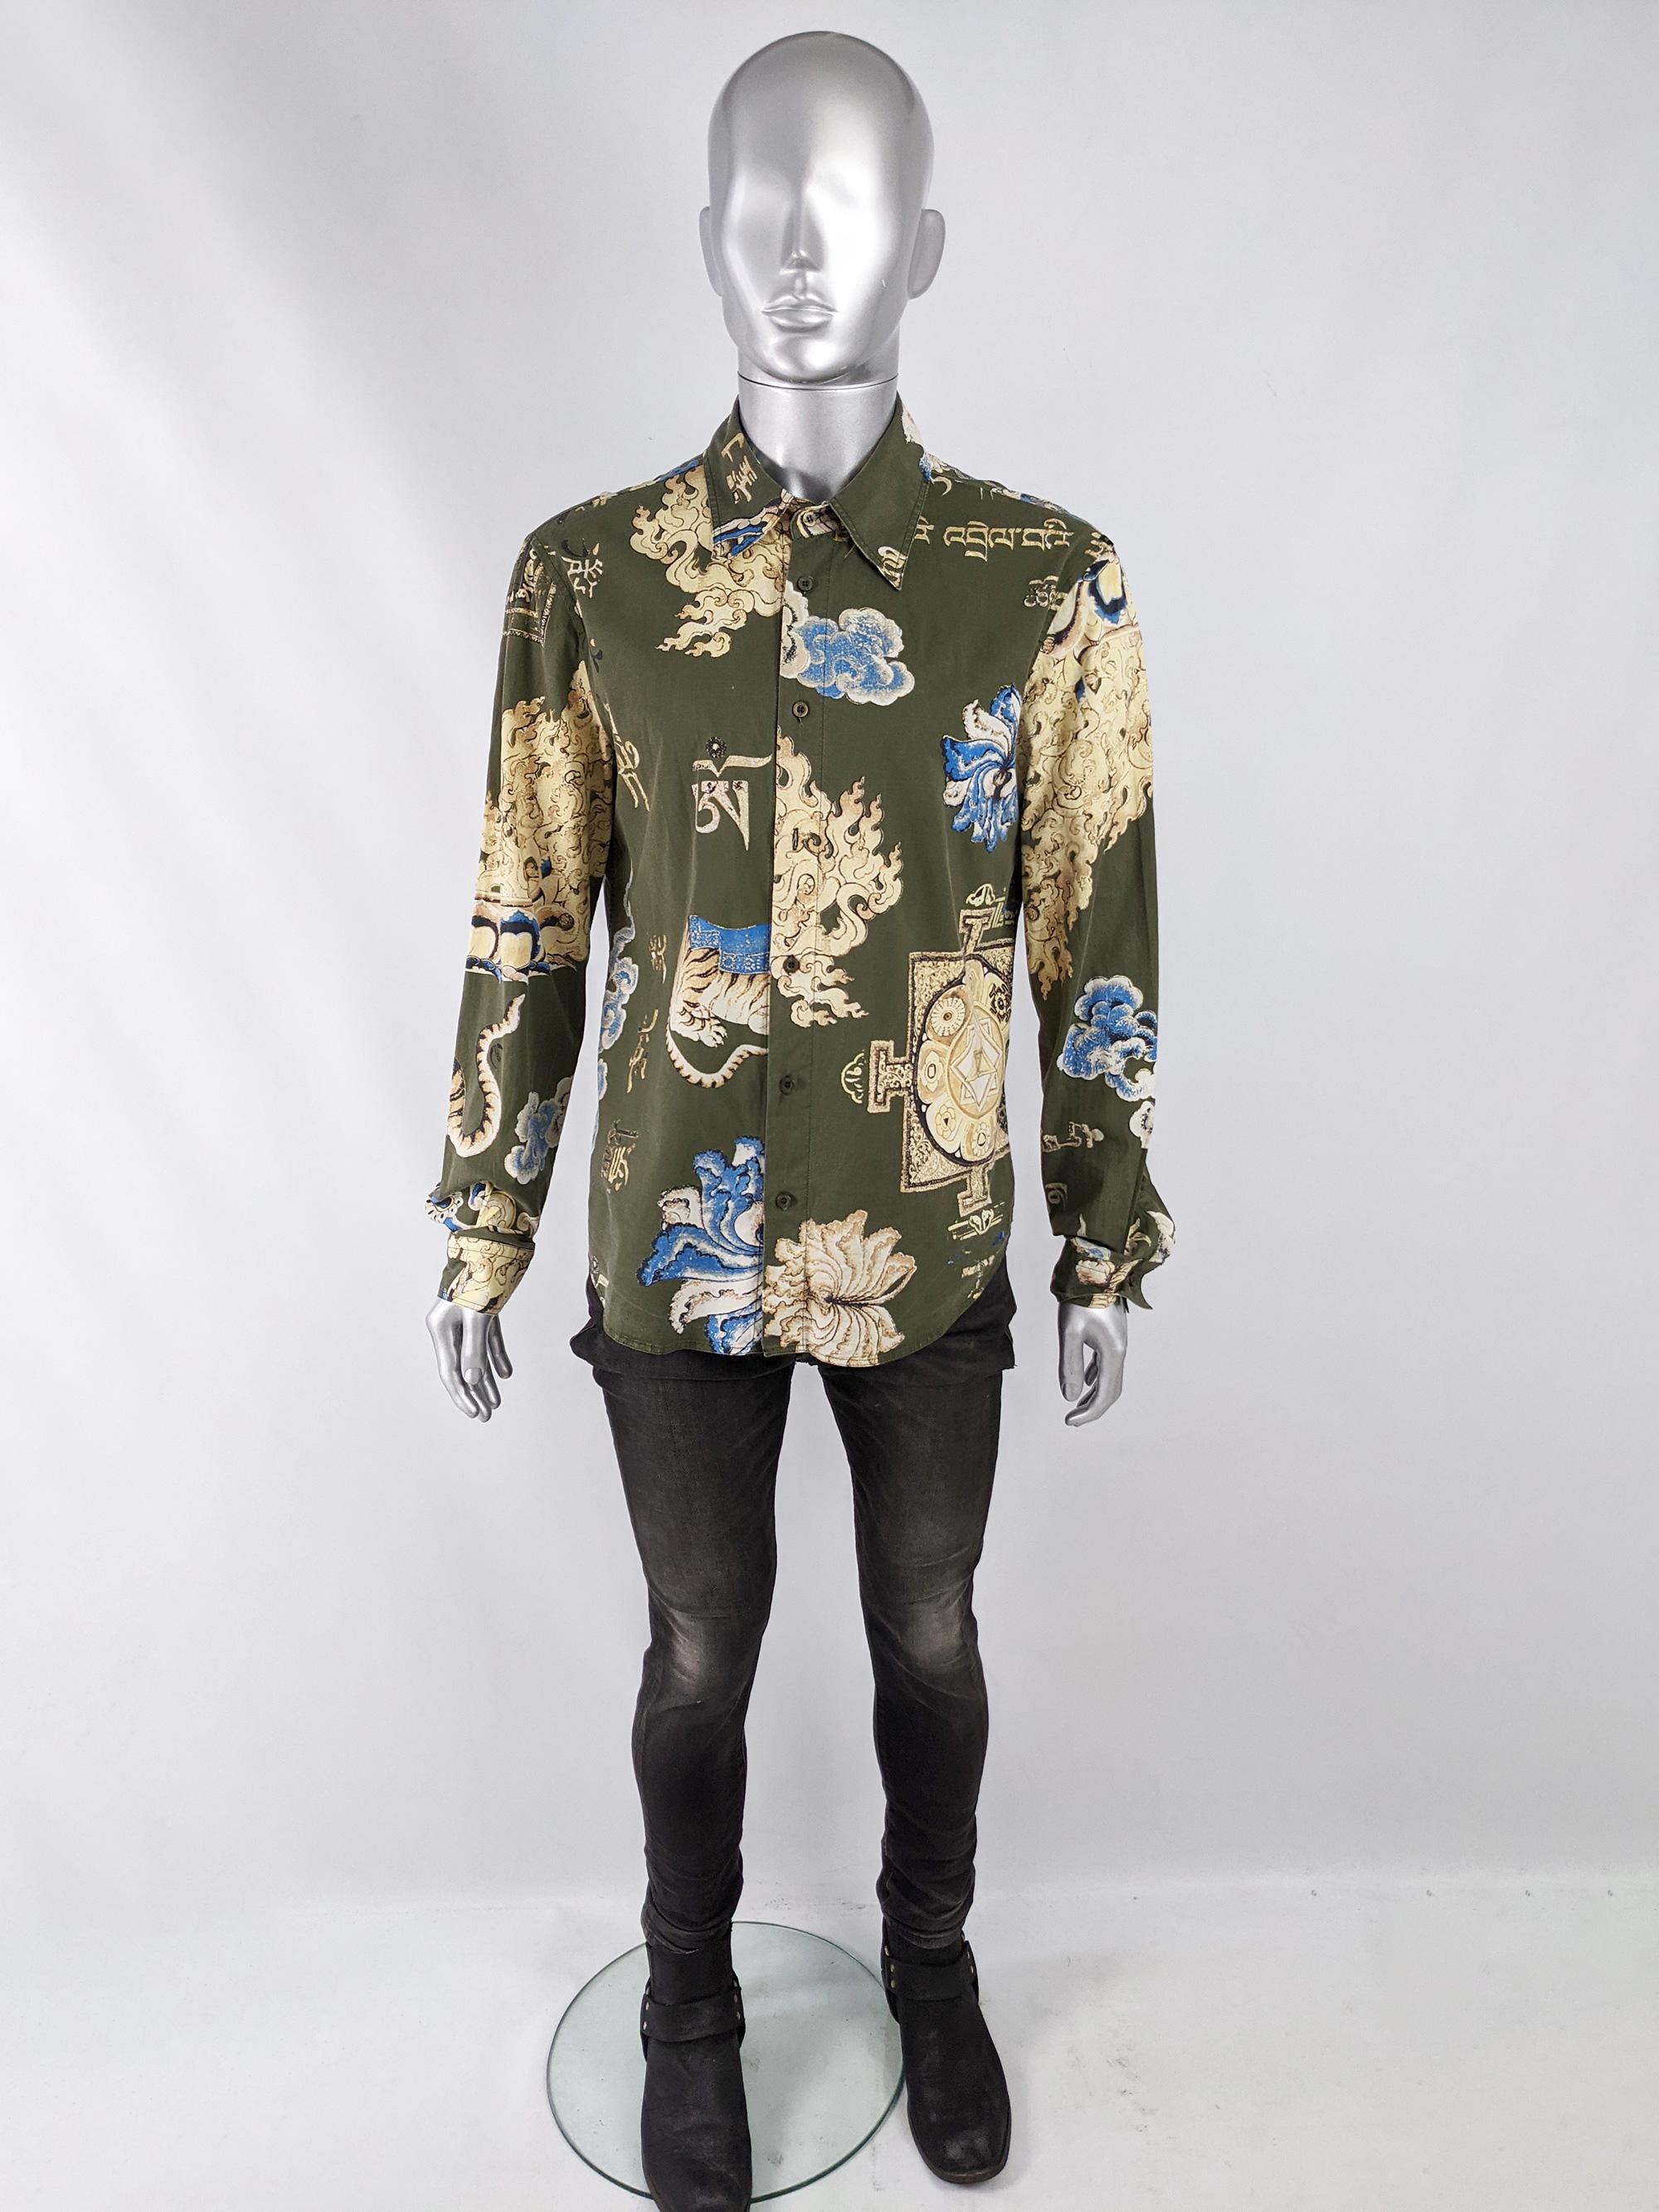 A stylish vintage mens long sleeve shirt from the late 90s / early 2000s by Roberto Cavalli for the Just Cavalli line.  In a green cotton with a blue and yellow Asian inspired all over print with gold printed in places throughout. 

Size: Marked